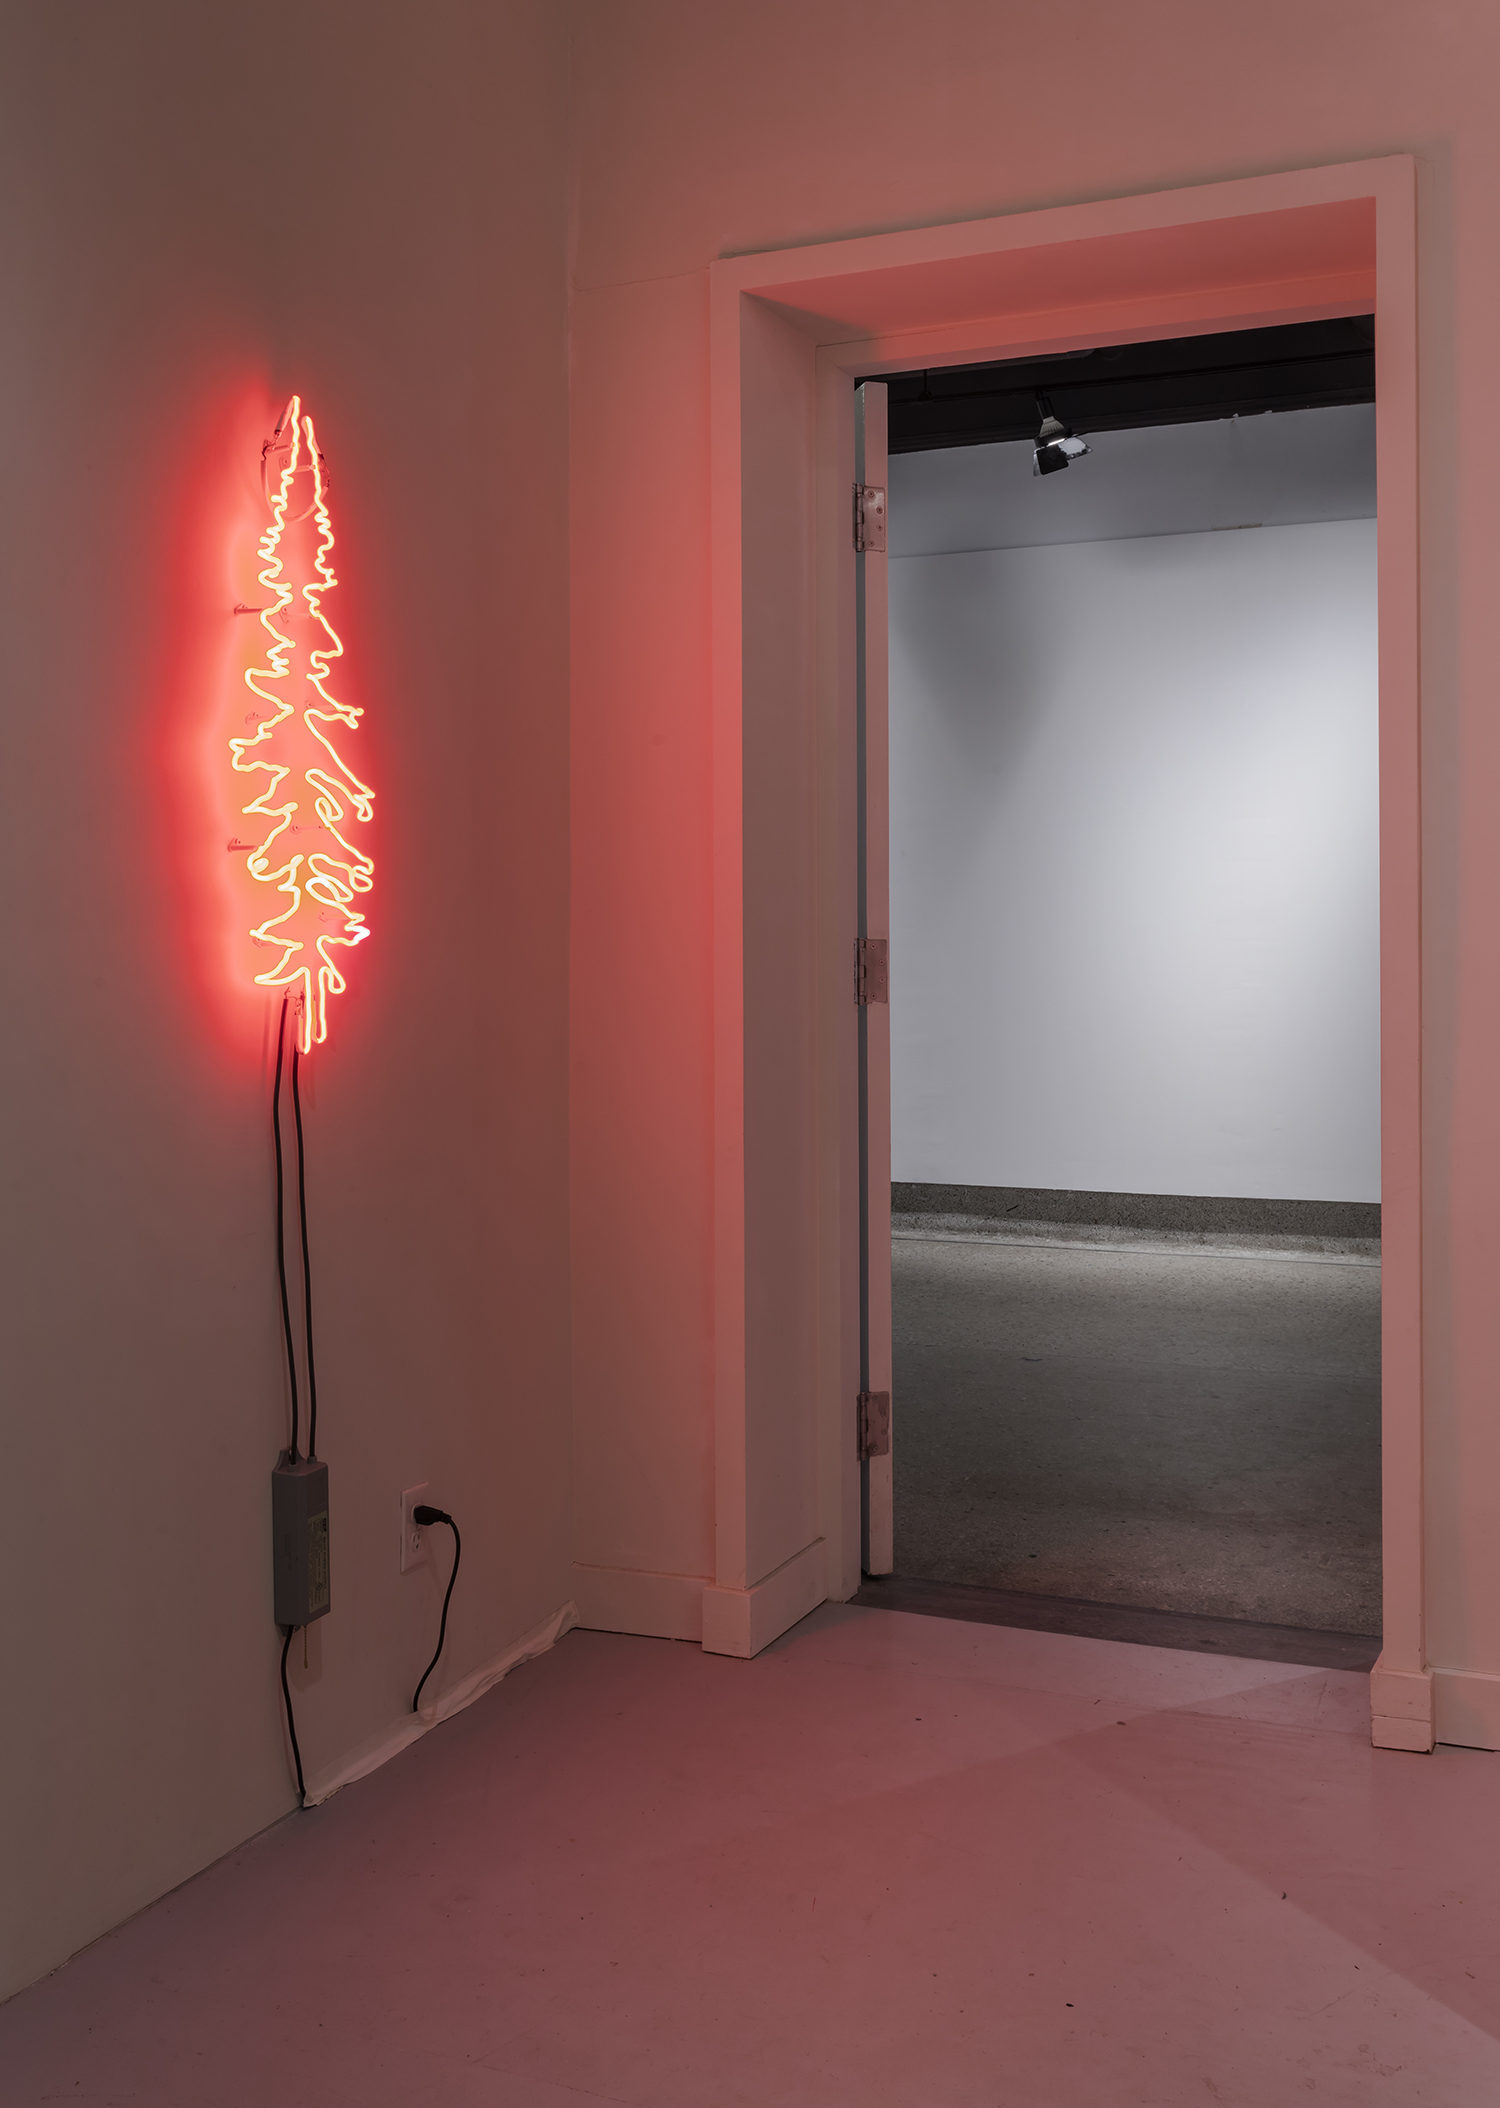 Biliana Velkova, Untitled Spruce Tree, 2014, fluorescent light tubes, from Precious Commodity, Critical Distance Centre for Curators, 2017. Installation documentation by Toni Hafkenscheid.